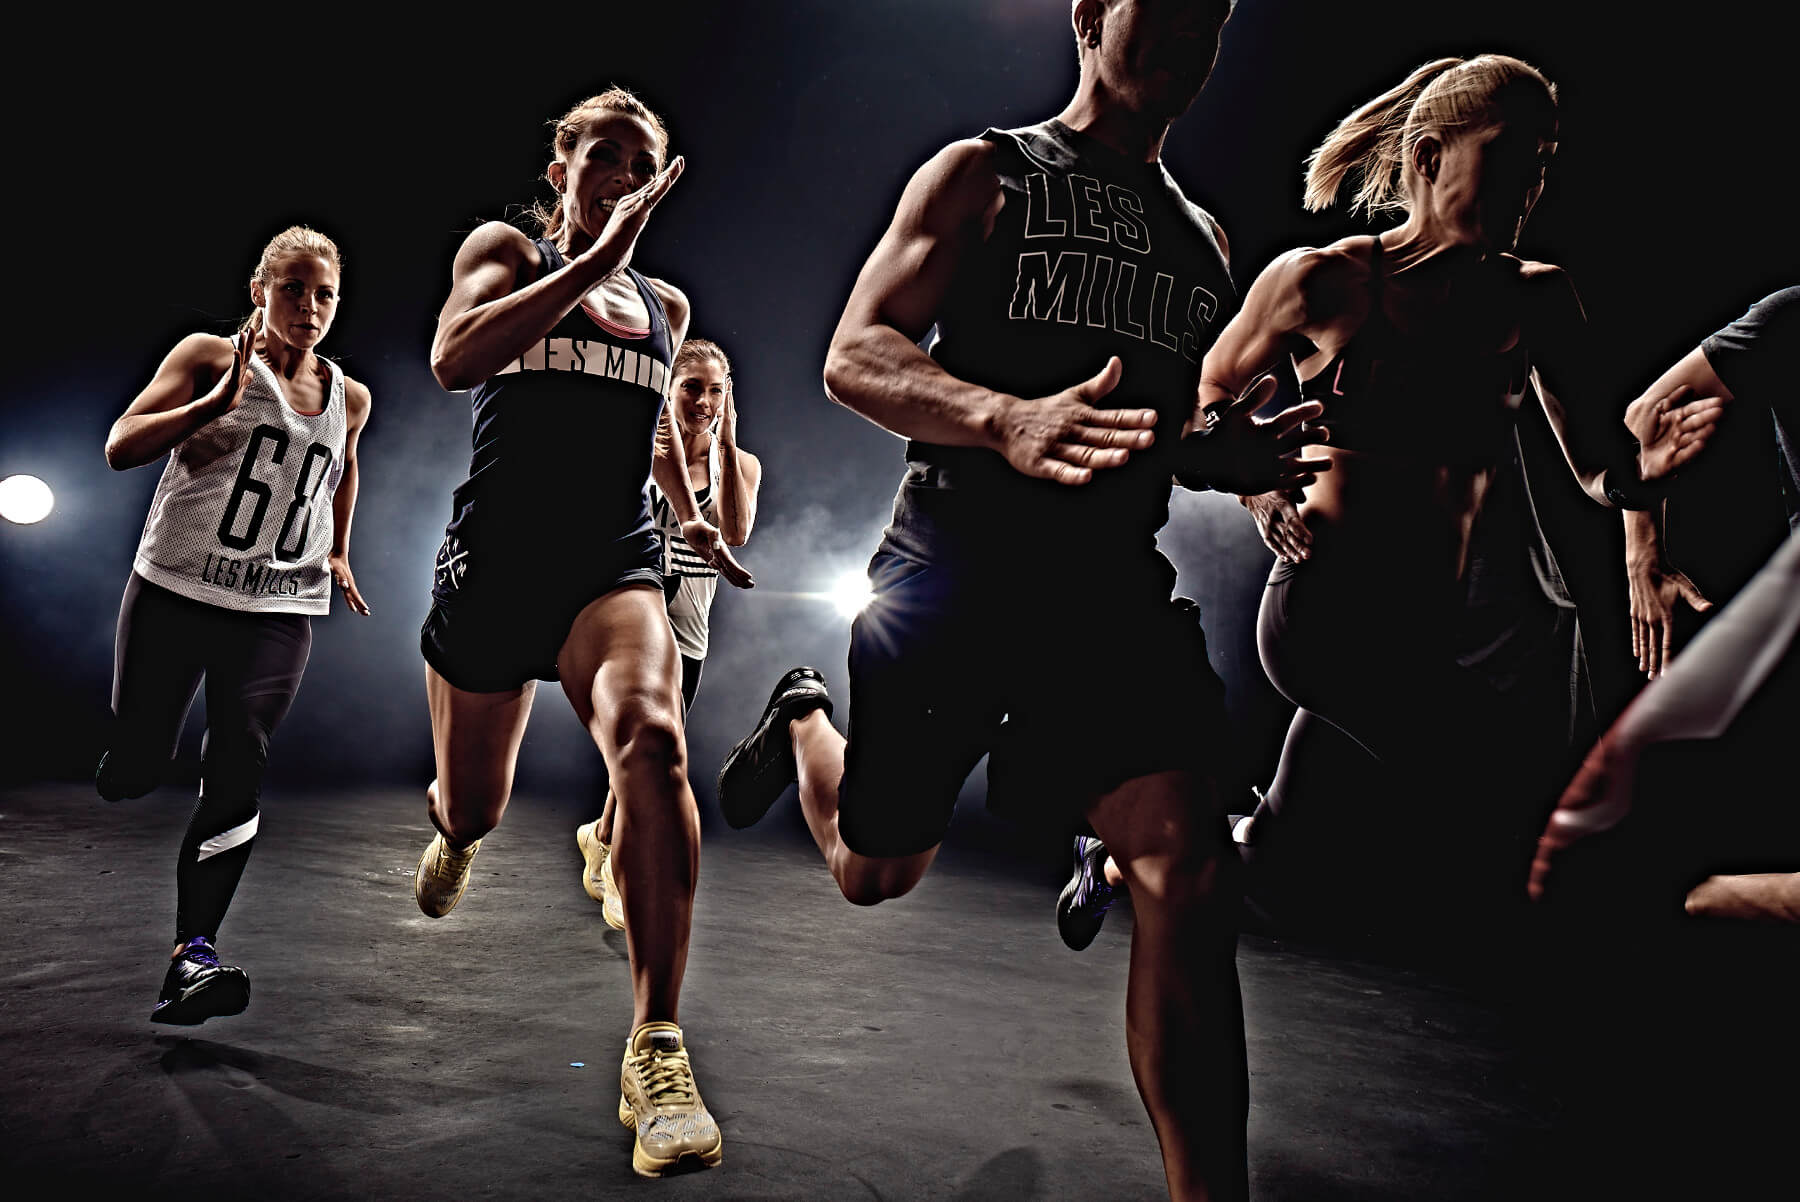 Les Mills - What can I expect in a Les Mills class and what is a